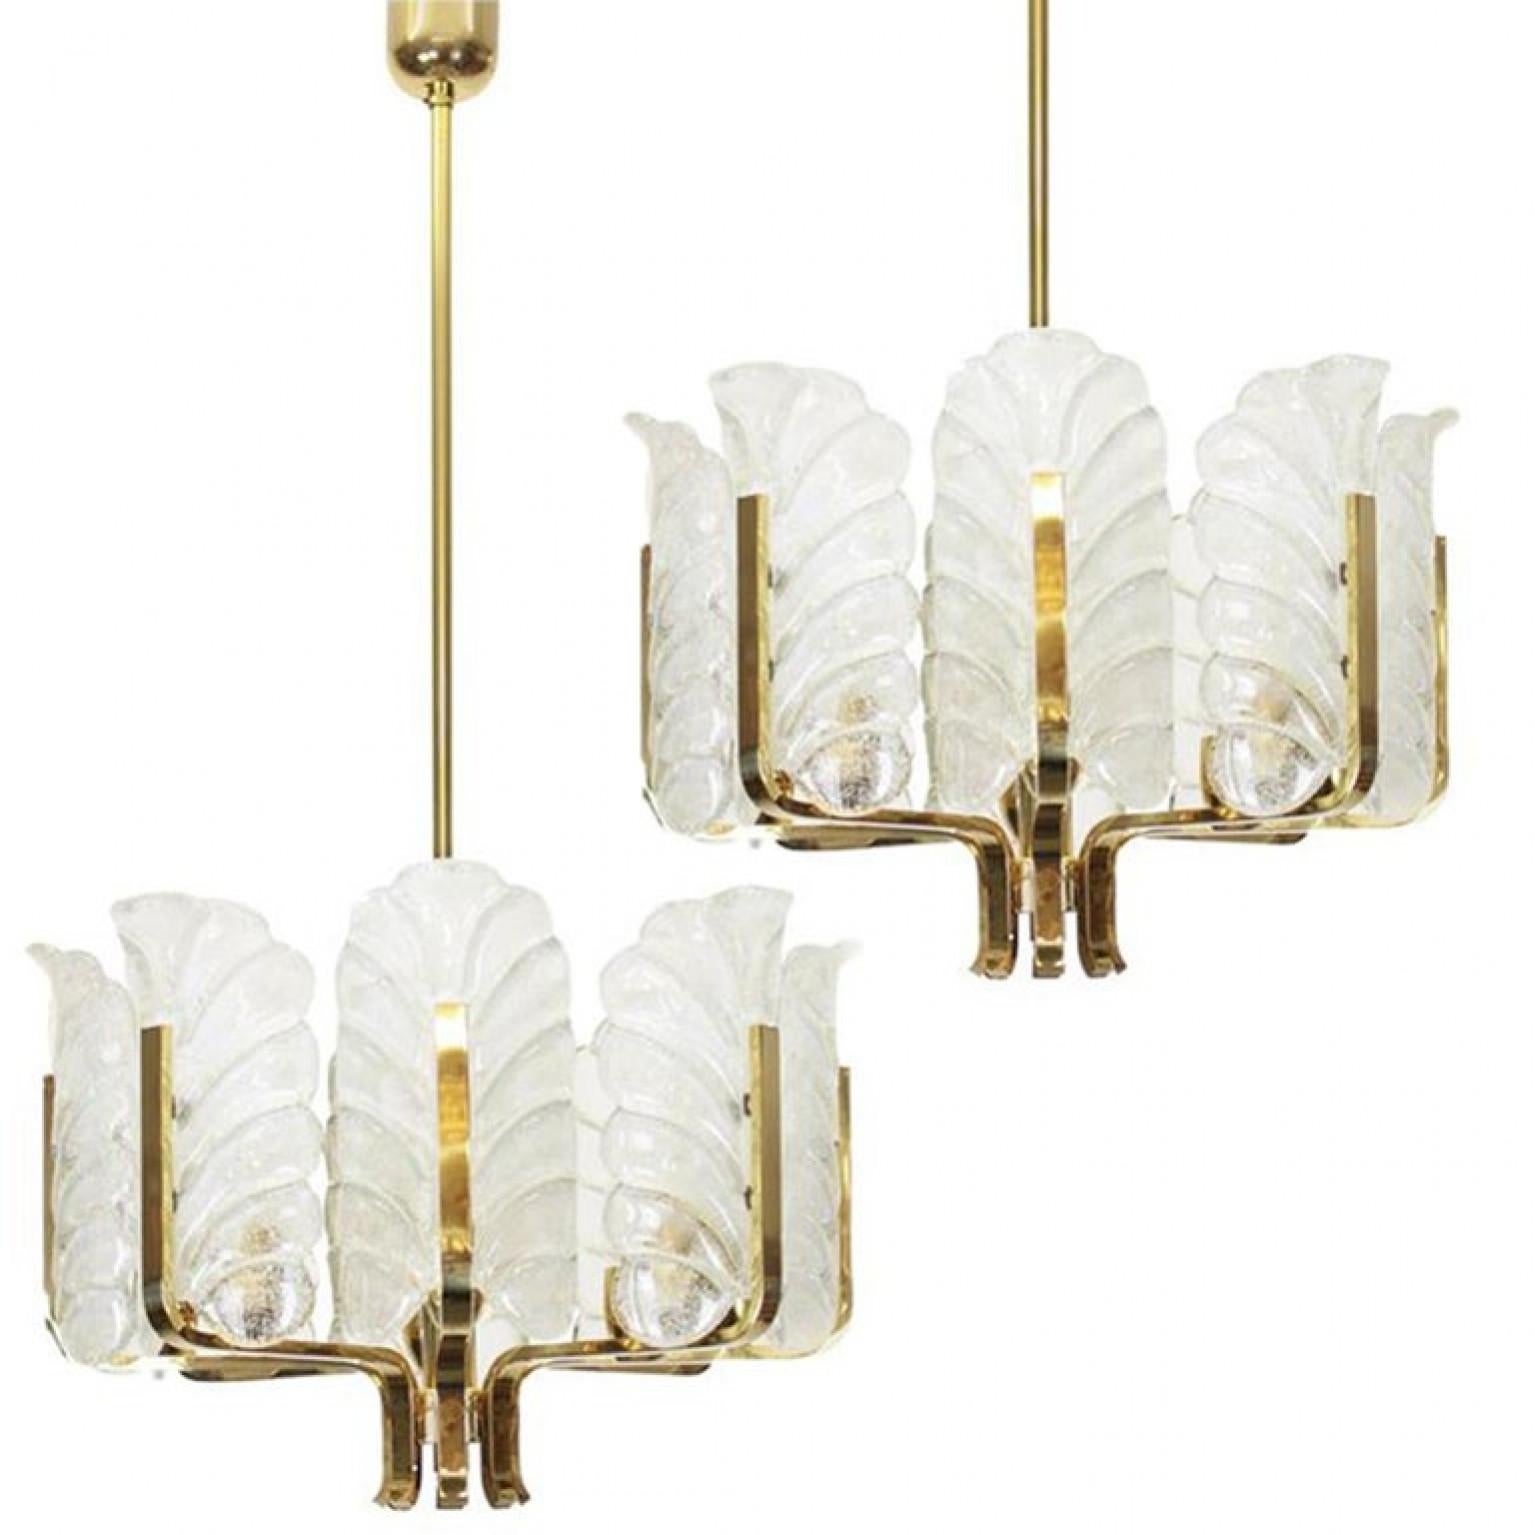 One of the Six Large Fagerlund Glass Leaves Brass Chandelier by Orrefors, 1960s For Sale 1